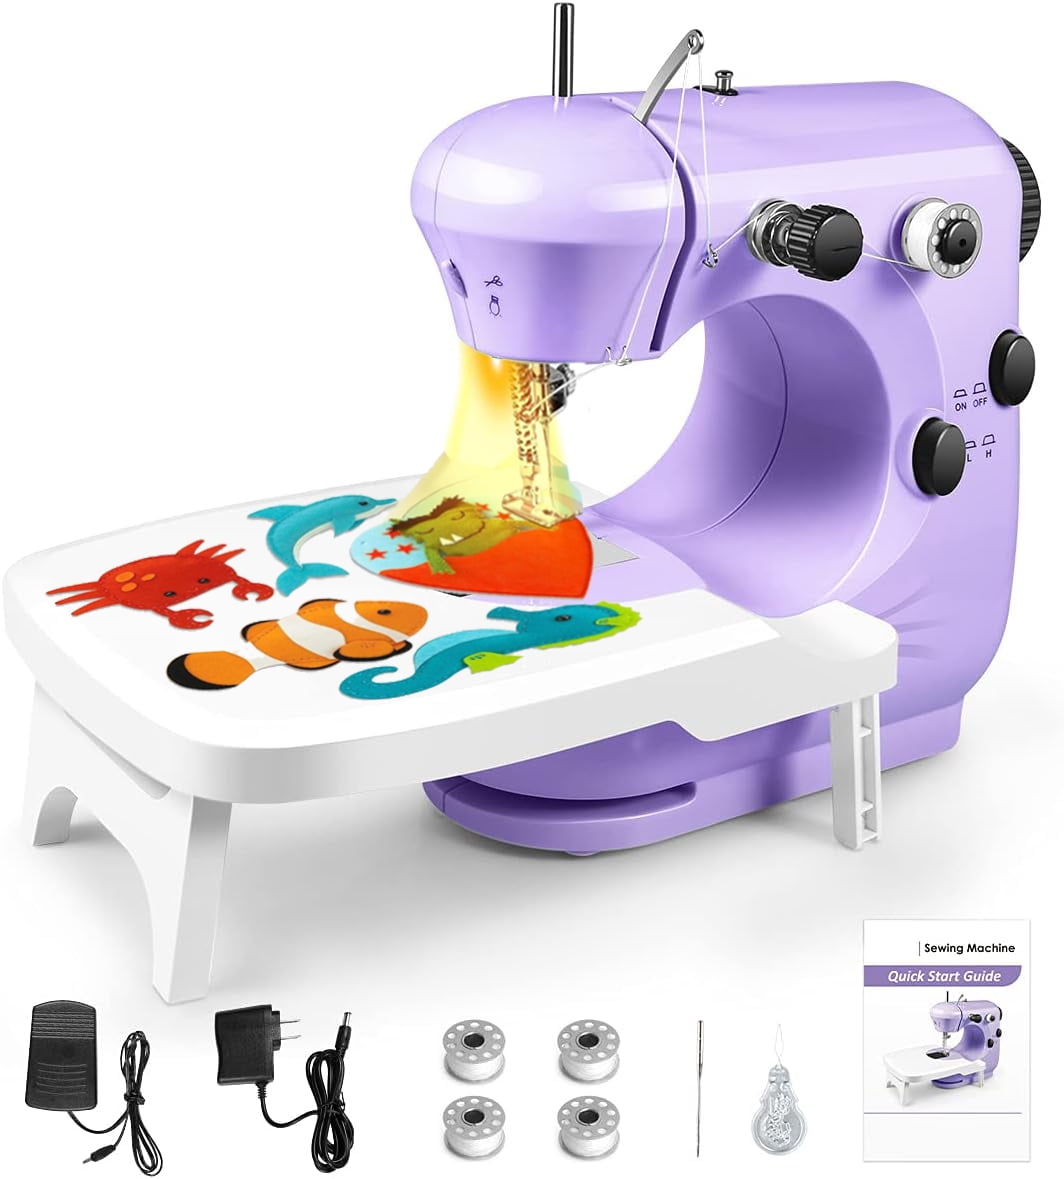 Sewing Machine, Small Sewing Machine with Extension Table for Beginners,  Kids Sewing Machine Adjustable 2 Speed with Sewing Kits, Best Gift for Kids  Women Space Saver, DIY, Household,Travel(Purple) 